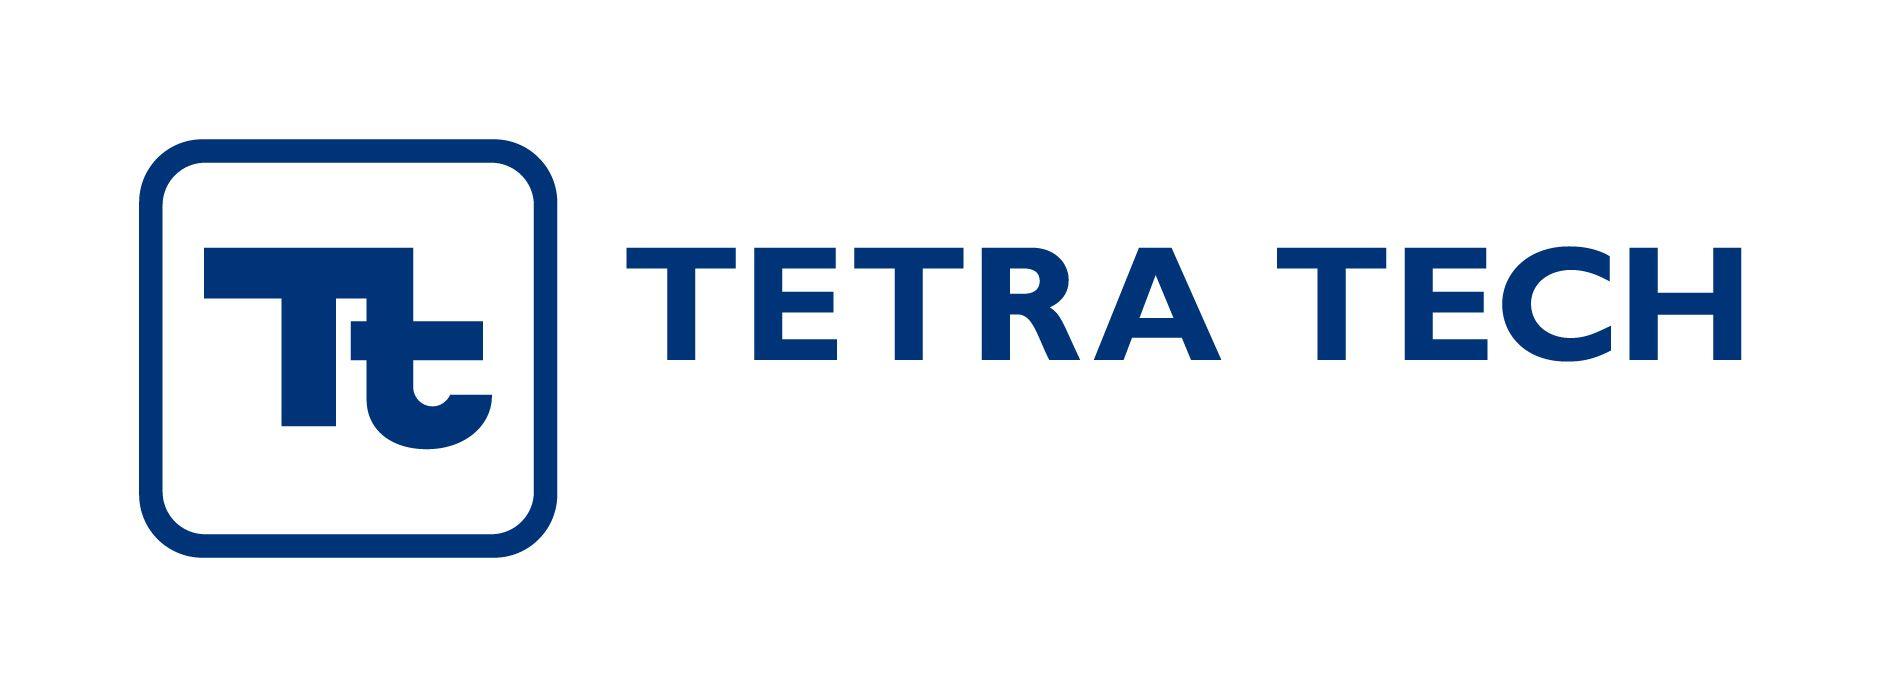 Tetra Logo - Consulting and Engineering Firm - Tetra Tech